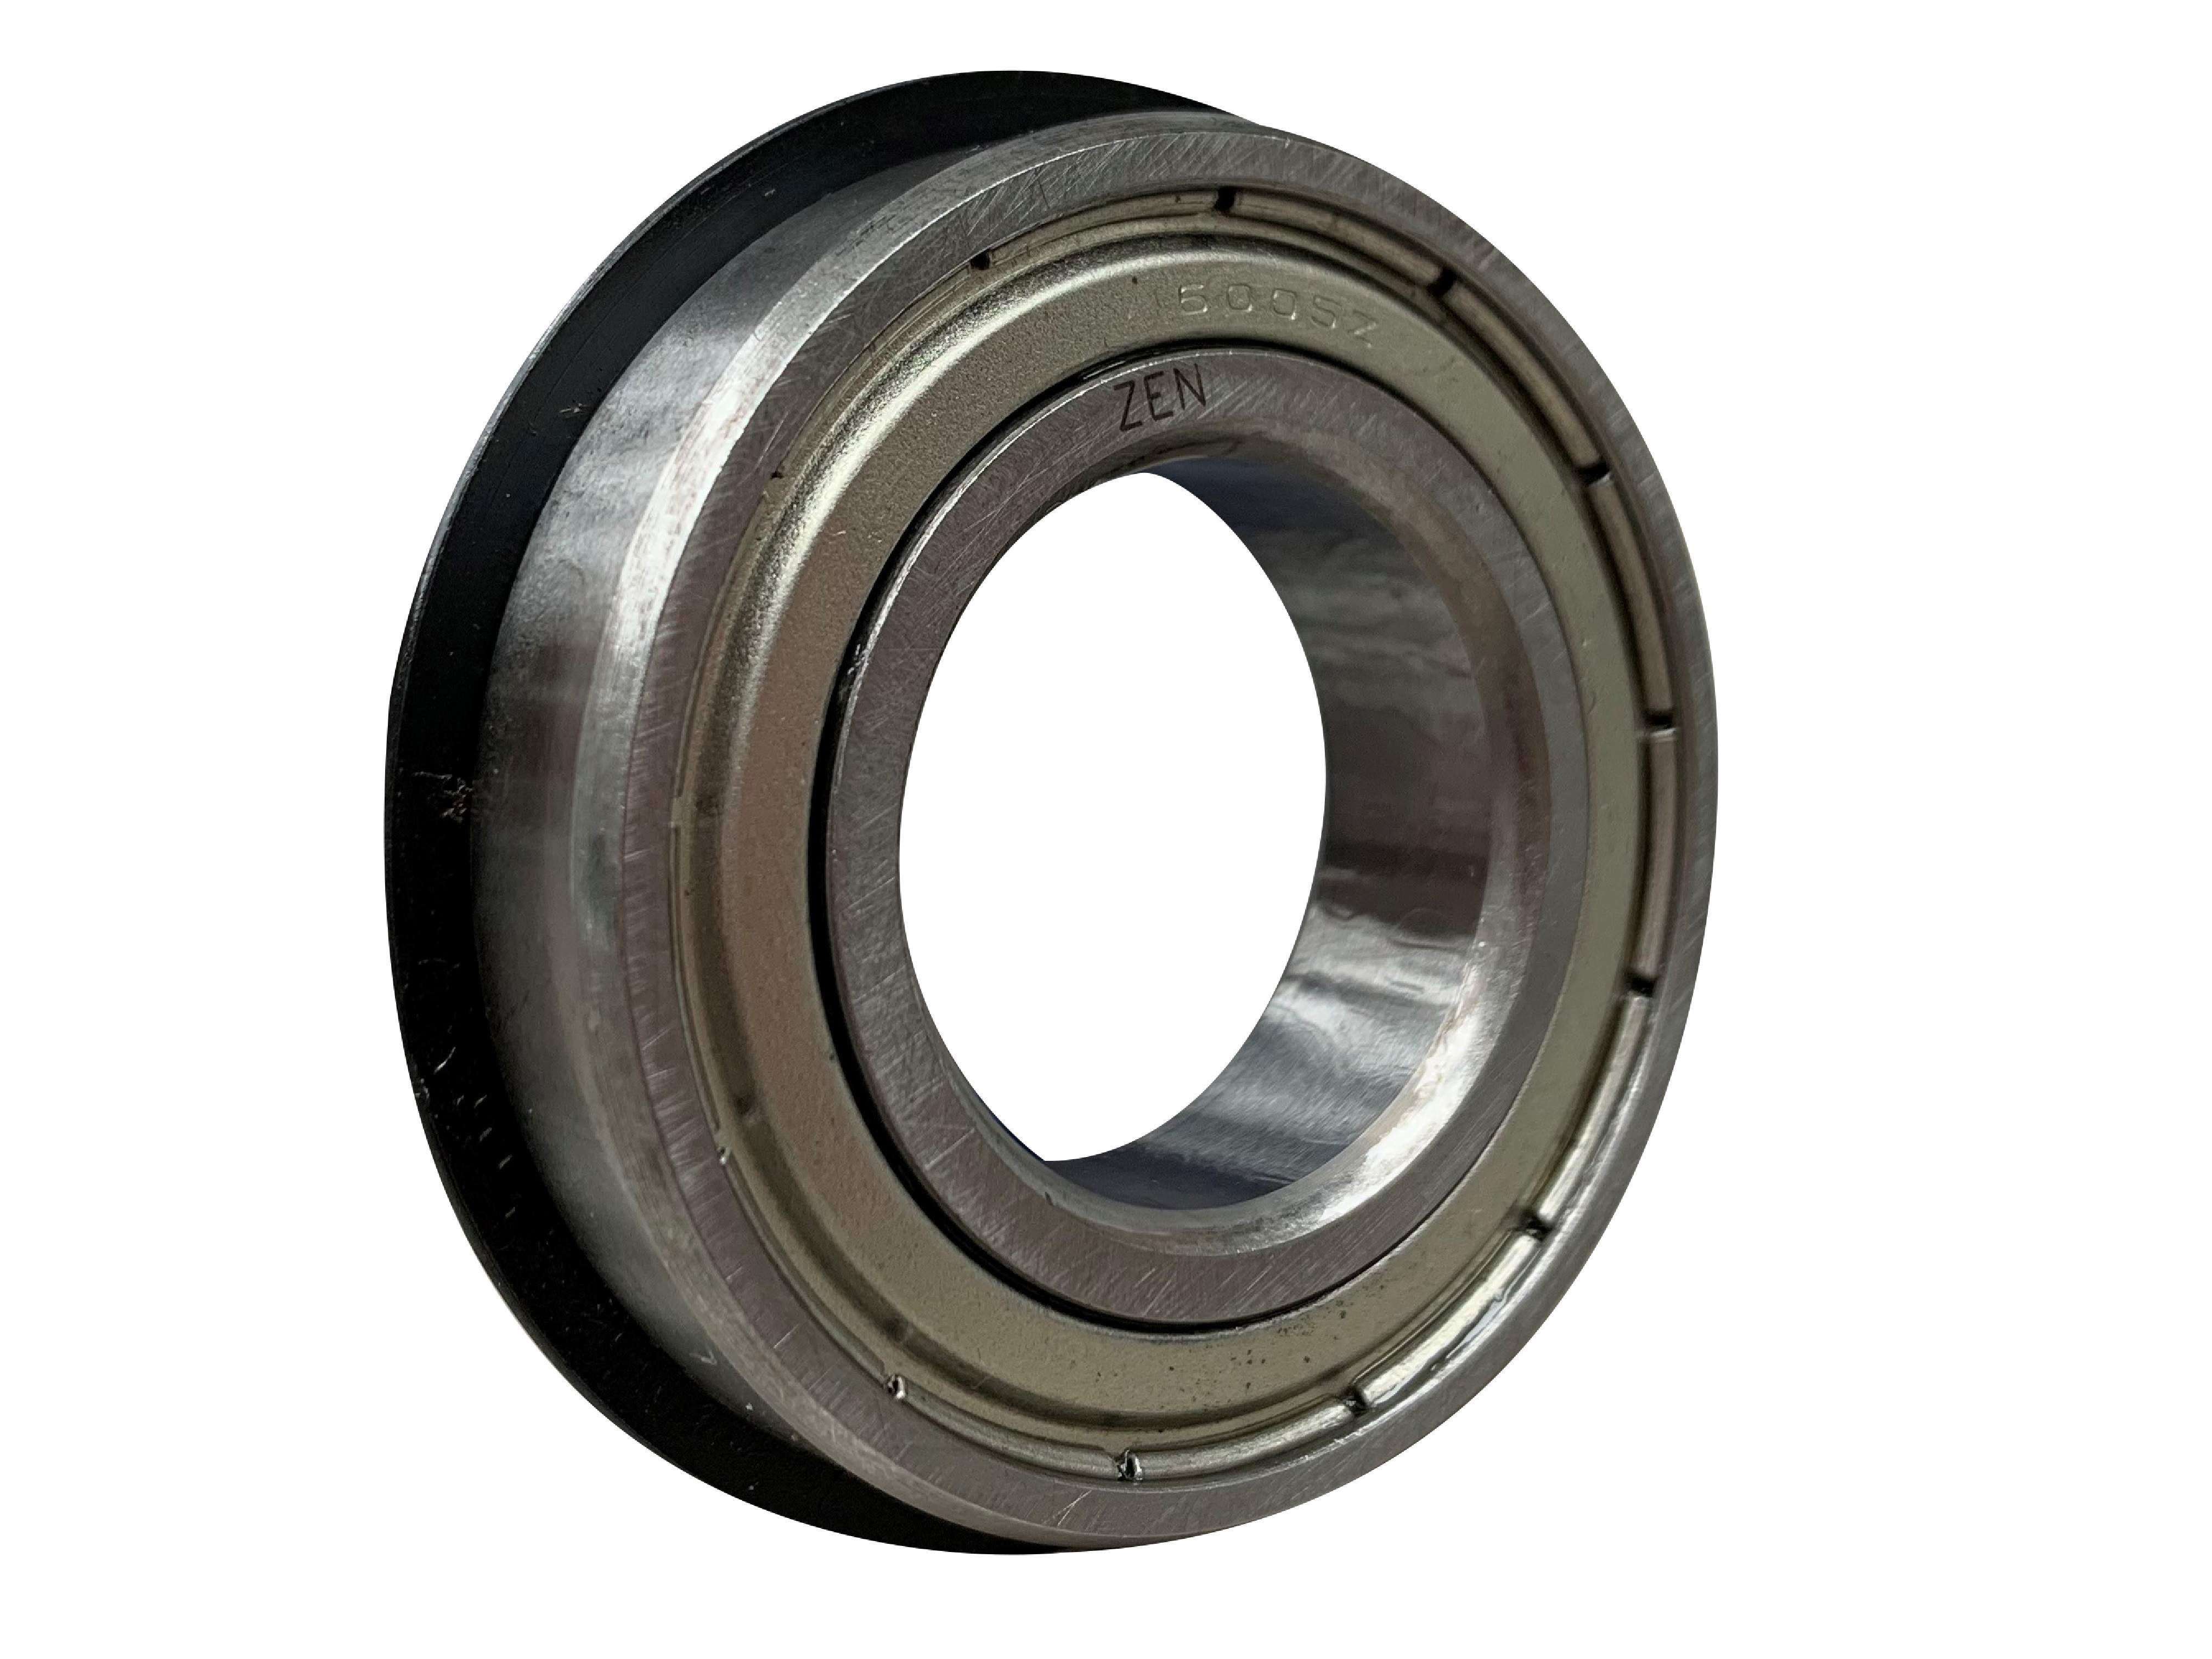 ZEN 6301-2Z-NR Shielded Ball Bearing With Snap Ring 12mm x 37mm x 12mm